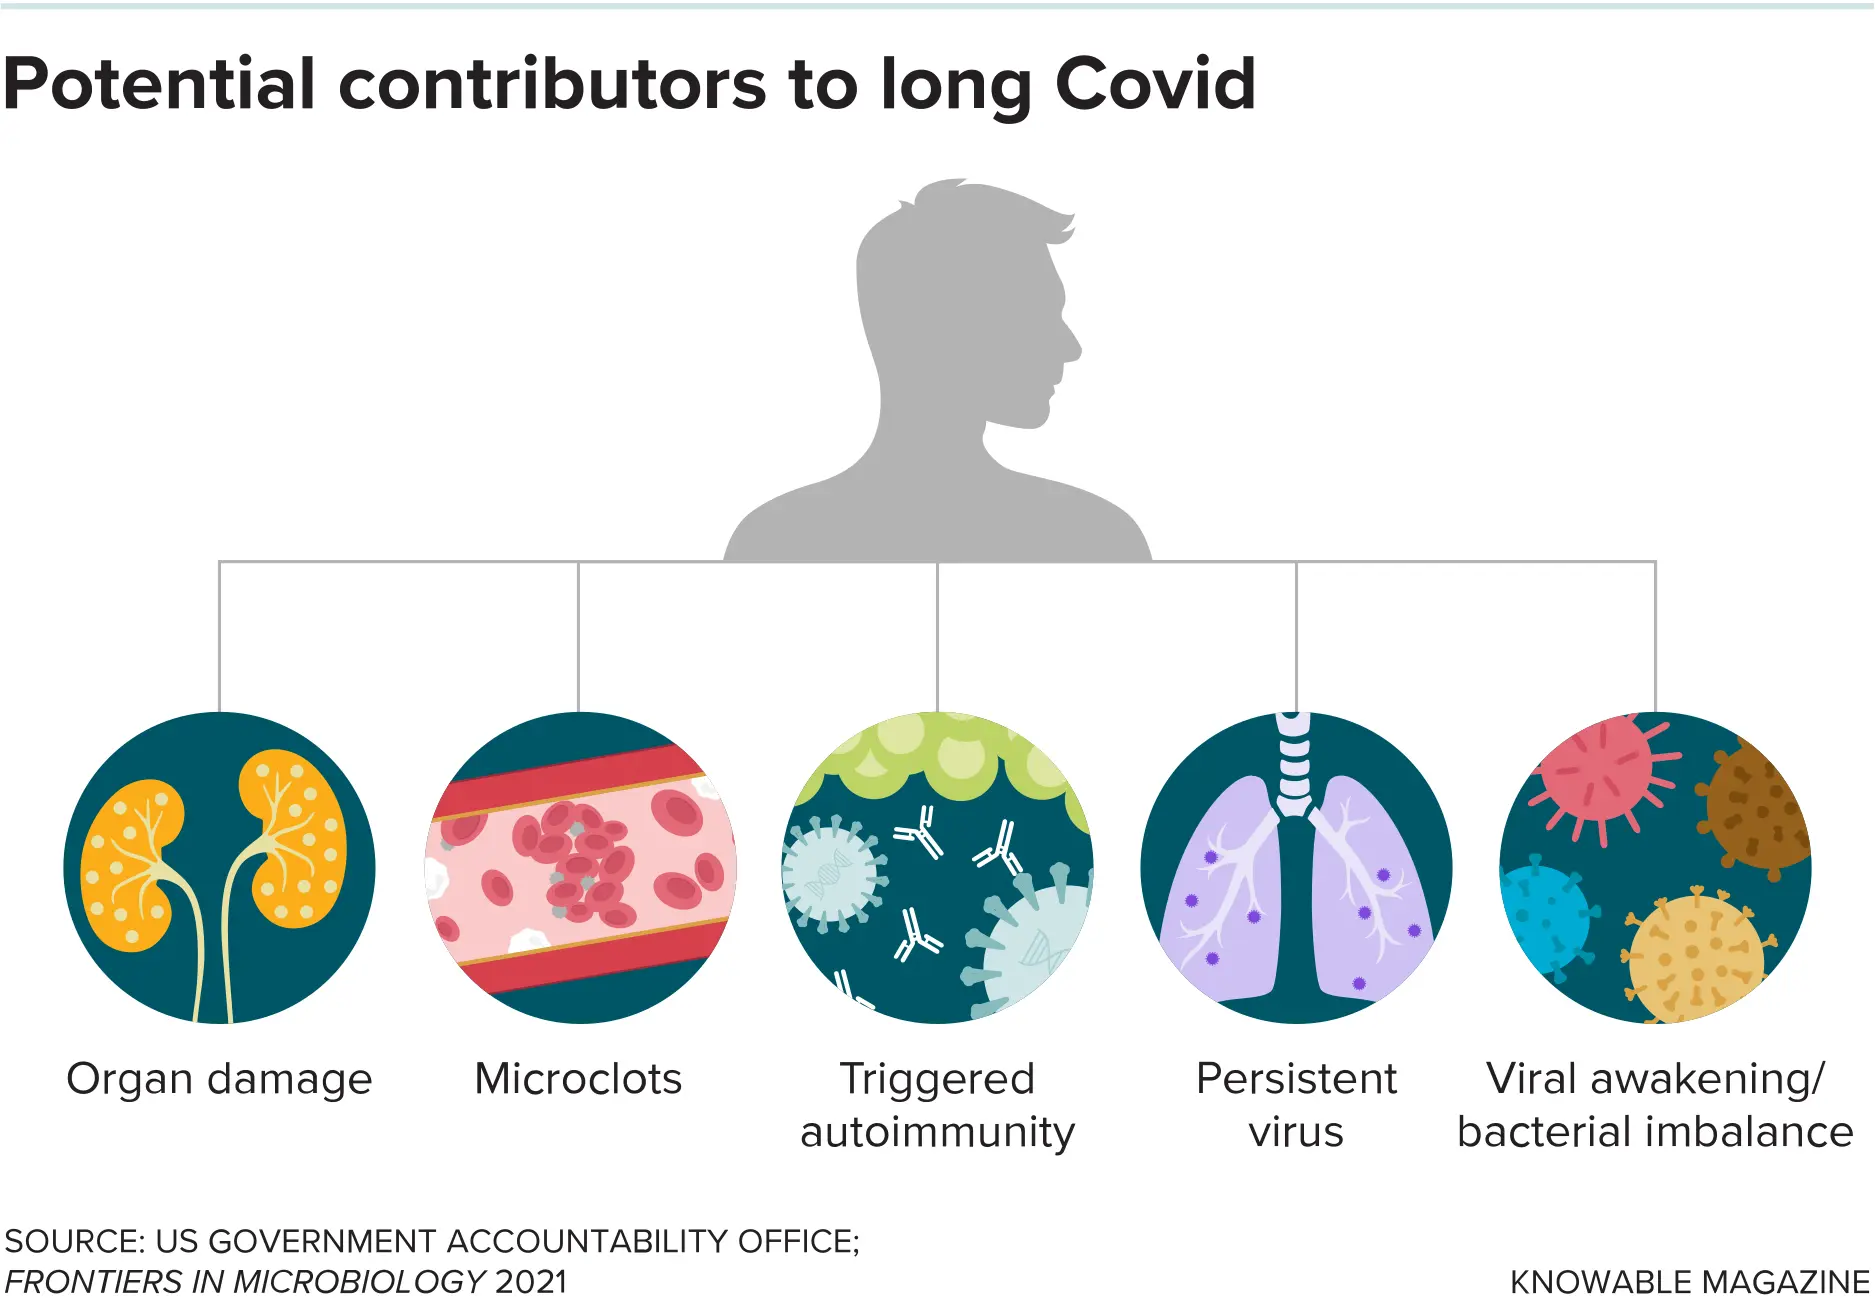 Even if the immune system successfully clears a Covid infection